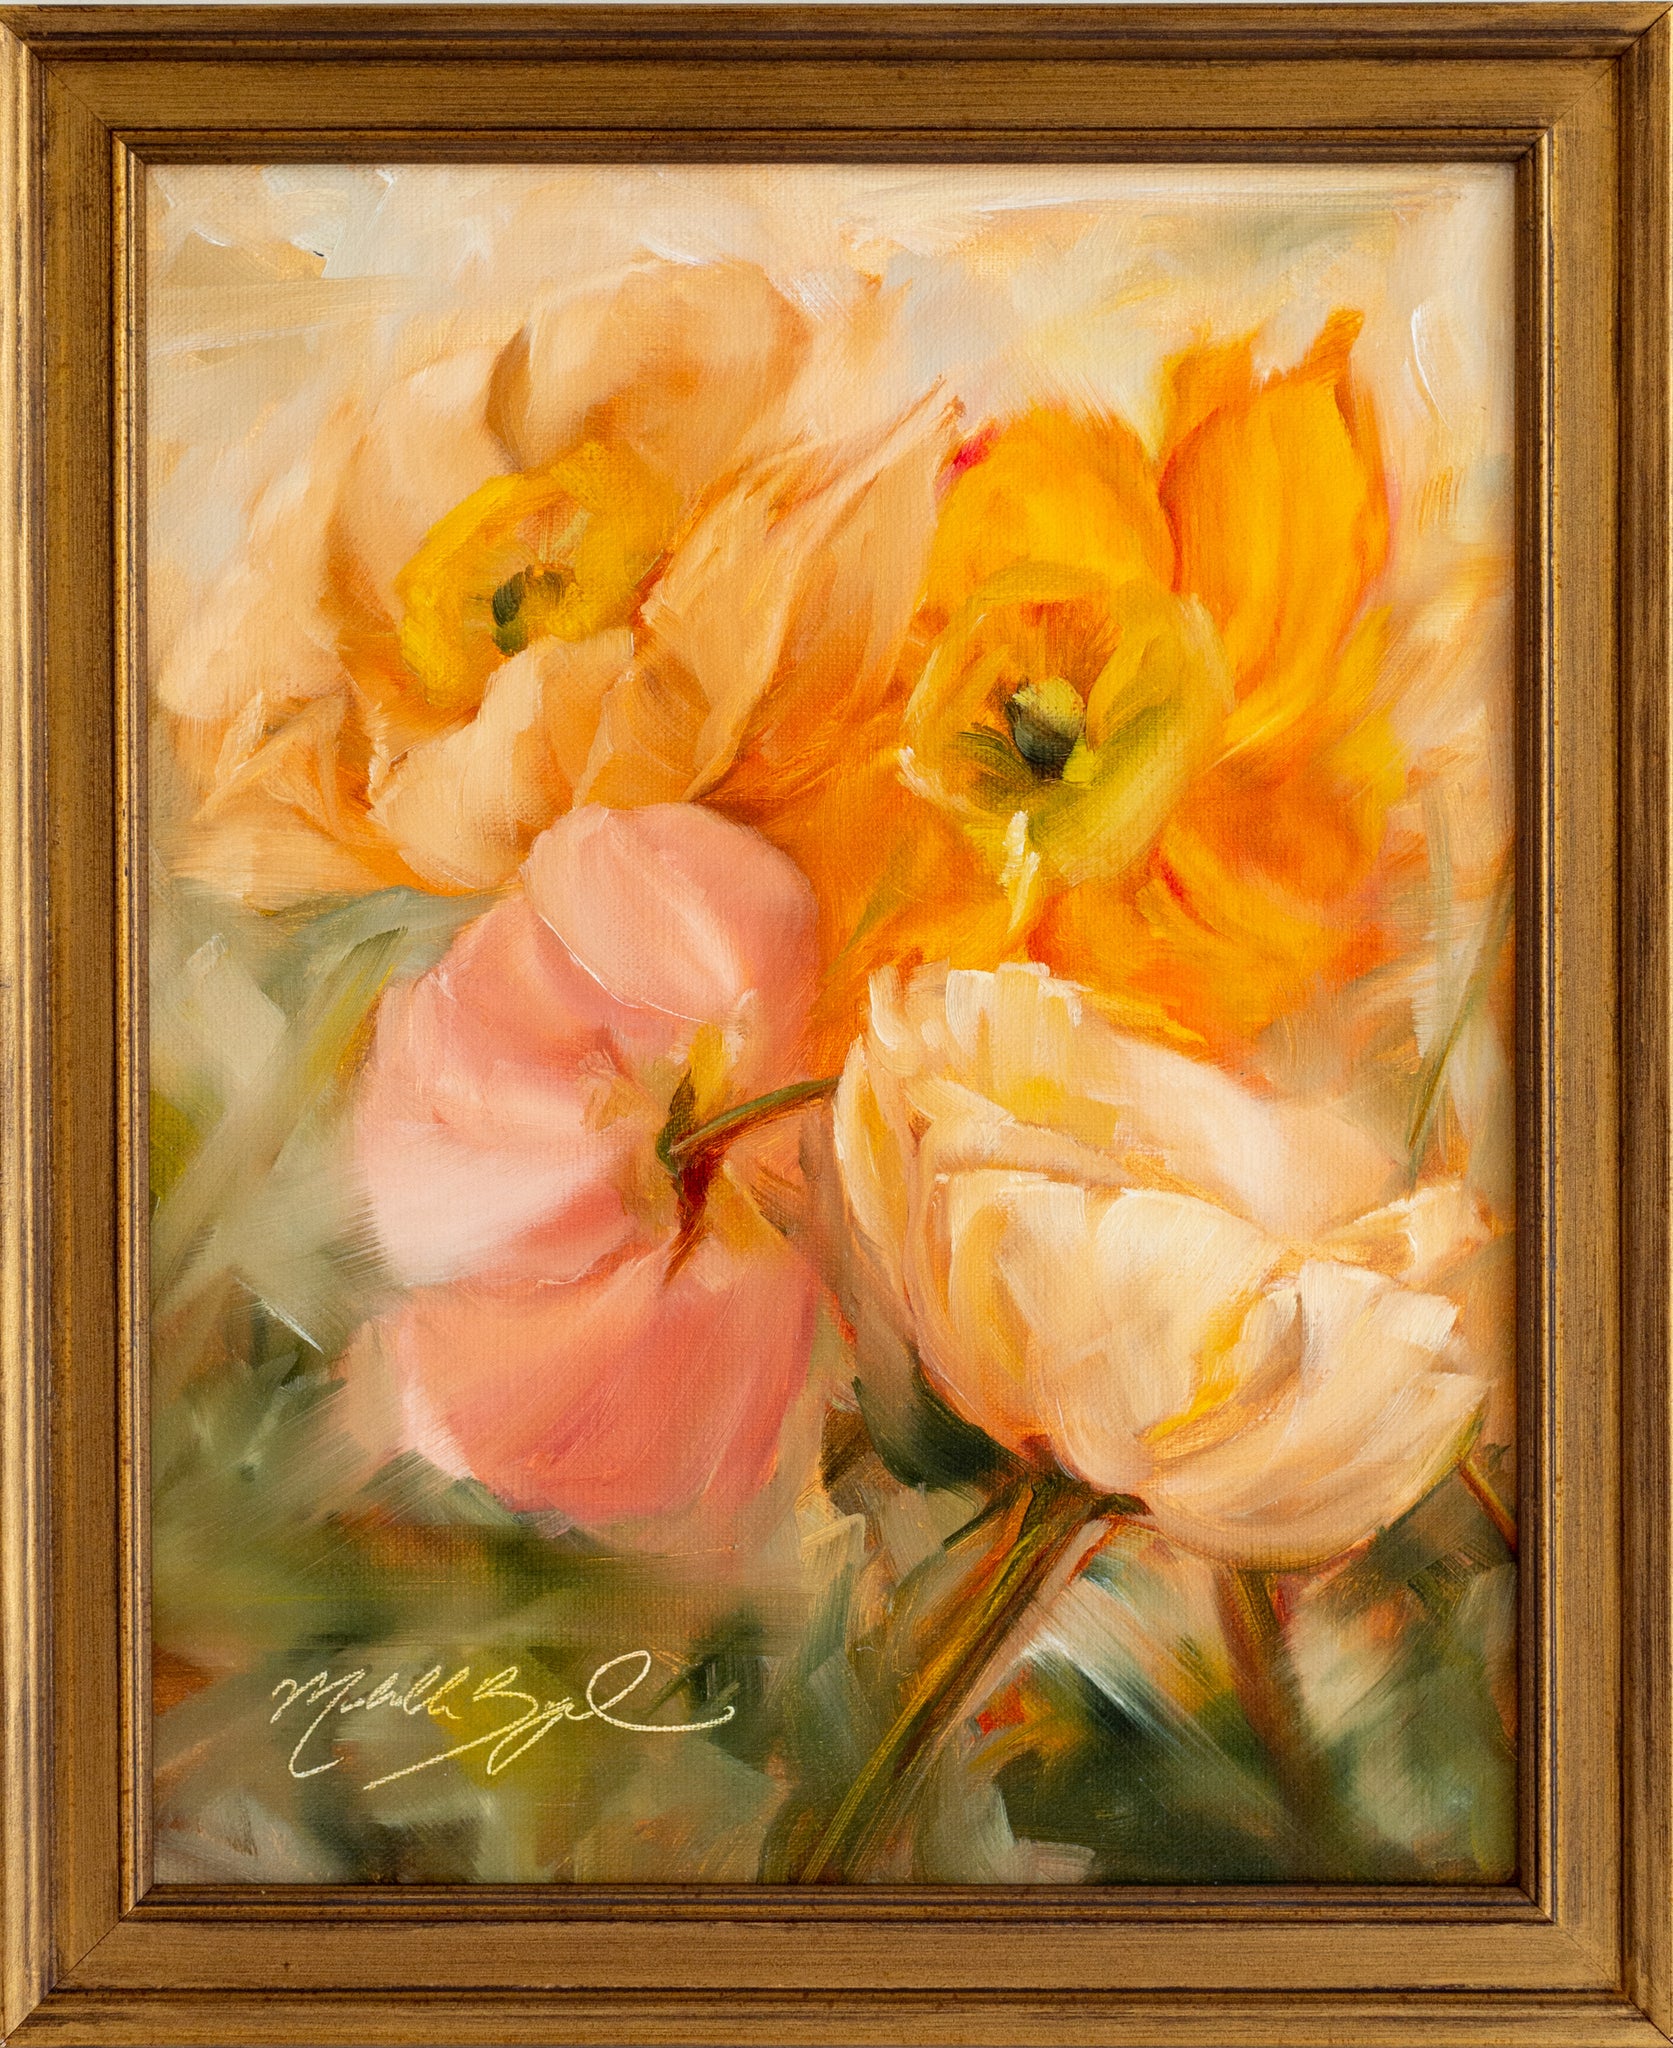 To Have a Garden - 8x10" Framed Oil Painting